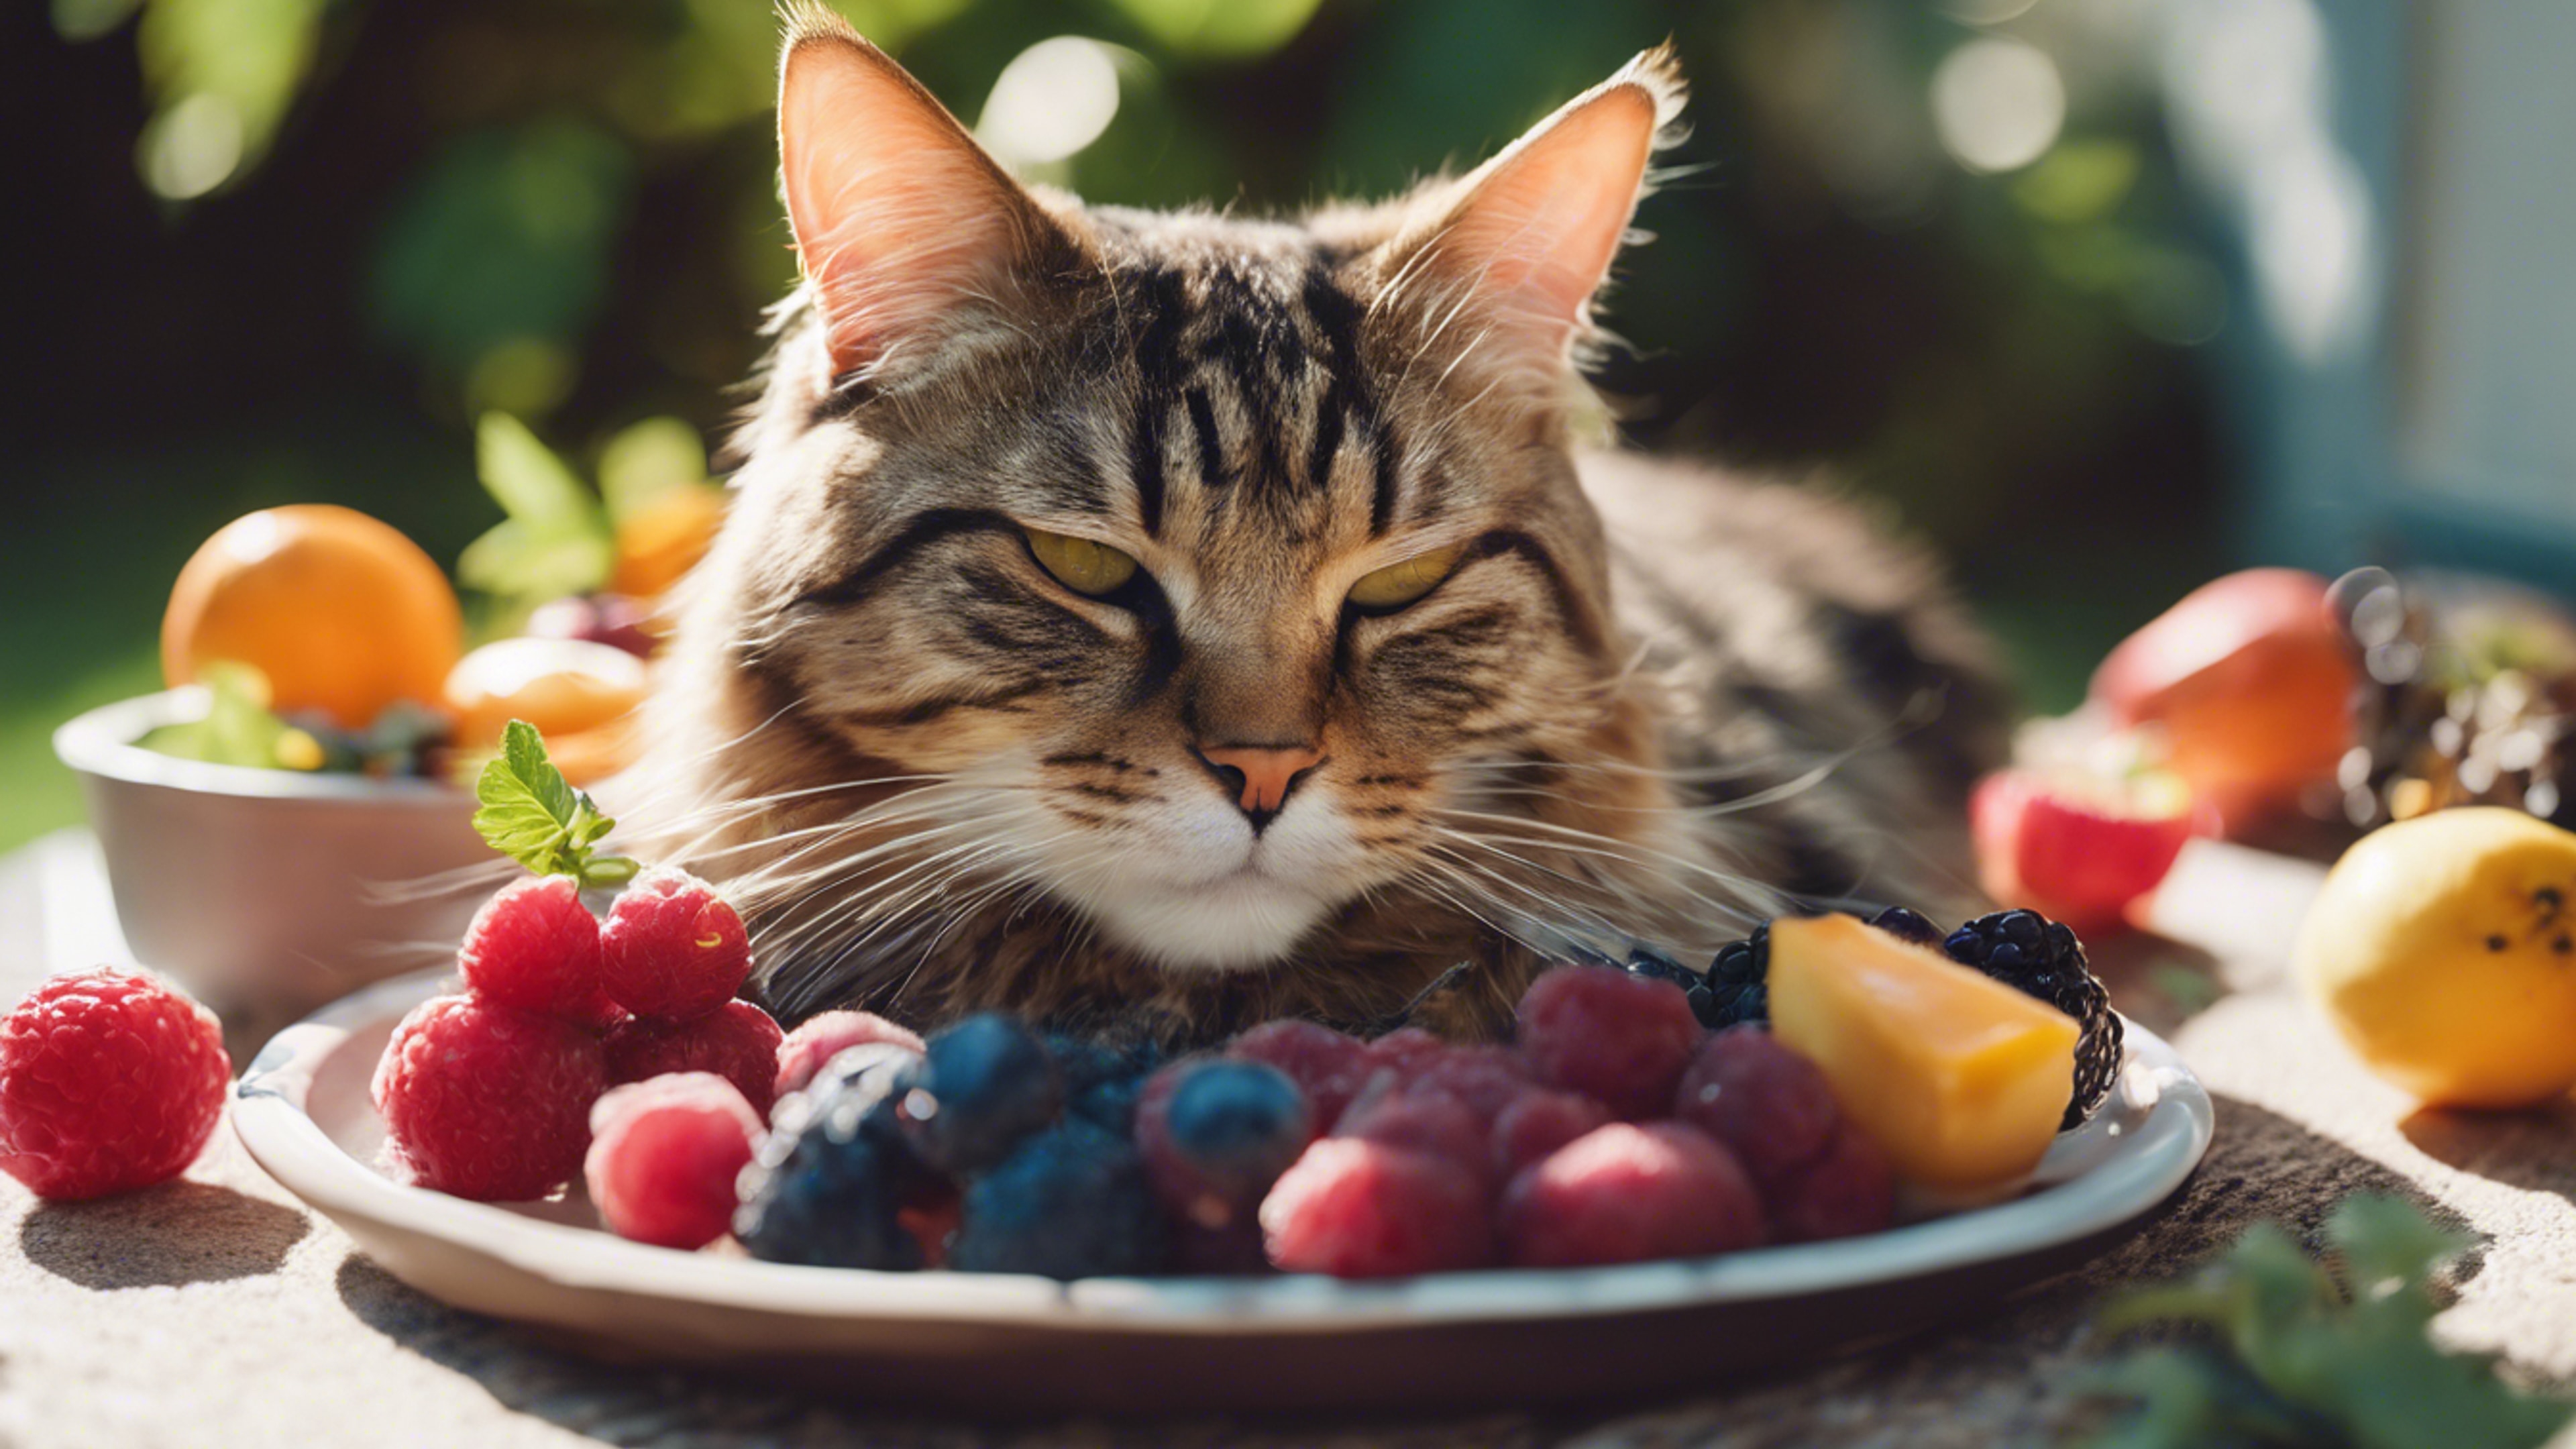 A sleepy Maine Coon cat relaxing next to a bowl of vibrant summer fruits. Kertas dinding[5a3905f0581c45108121]